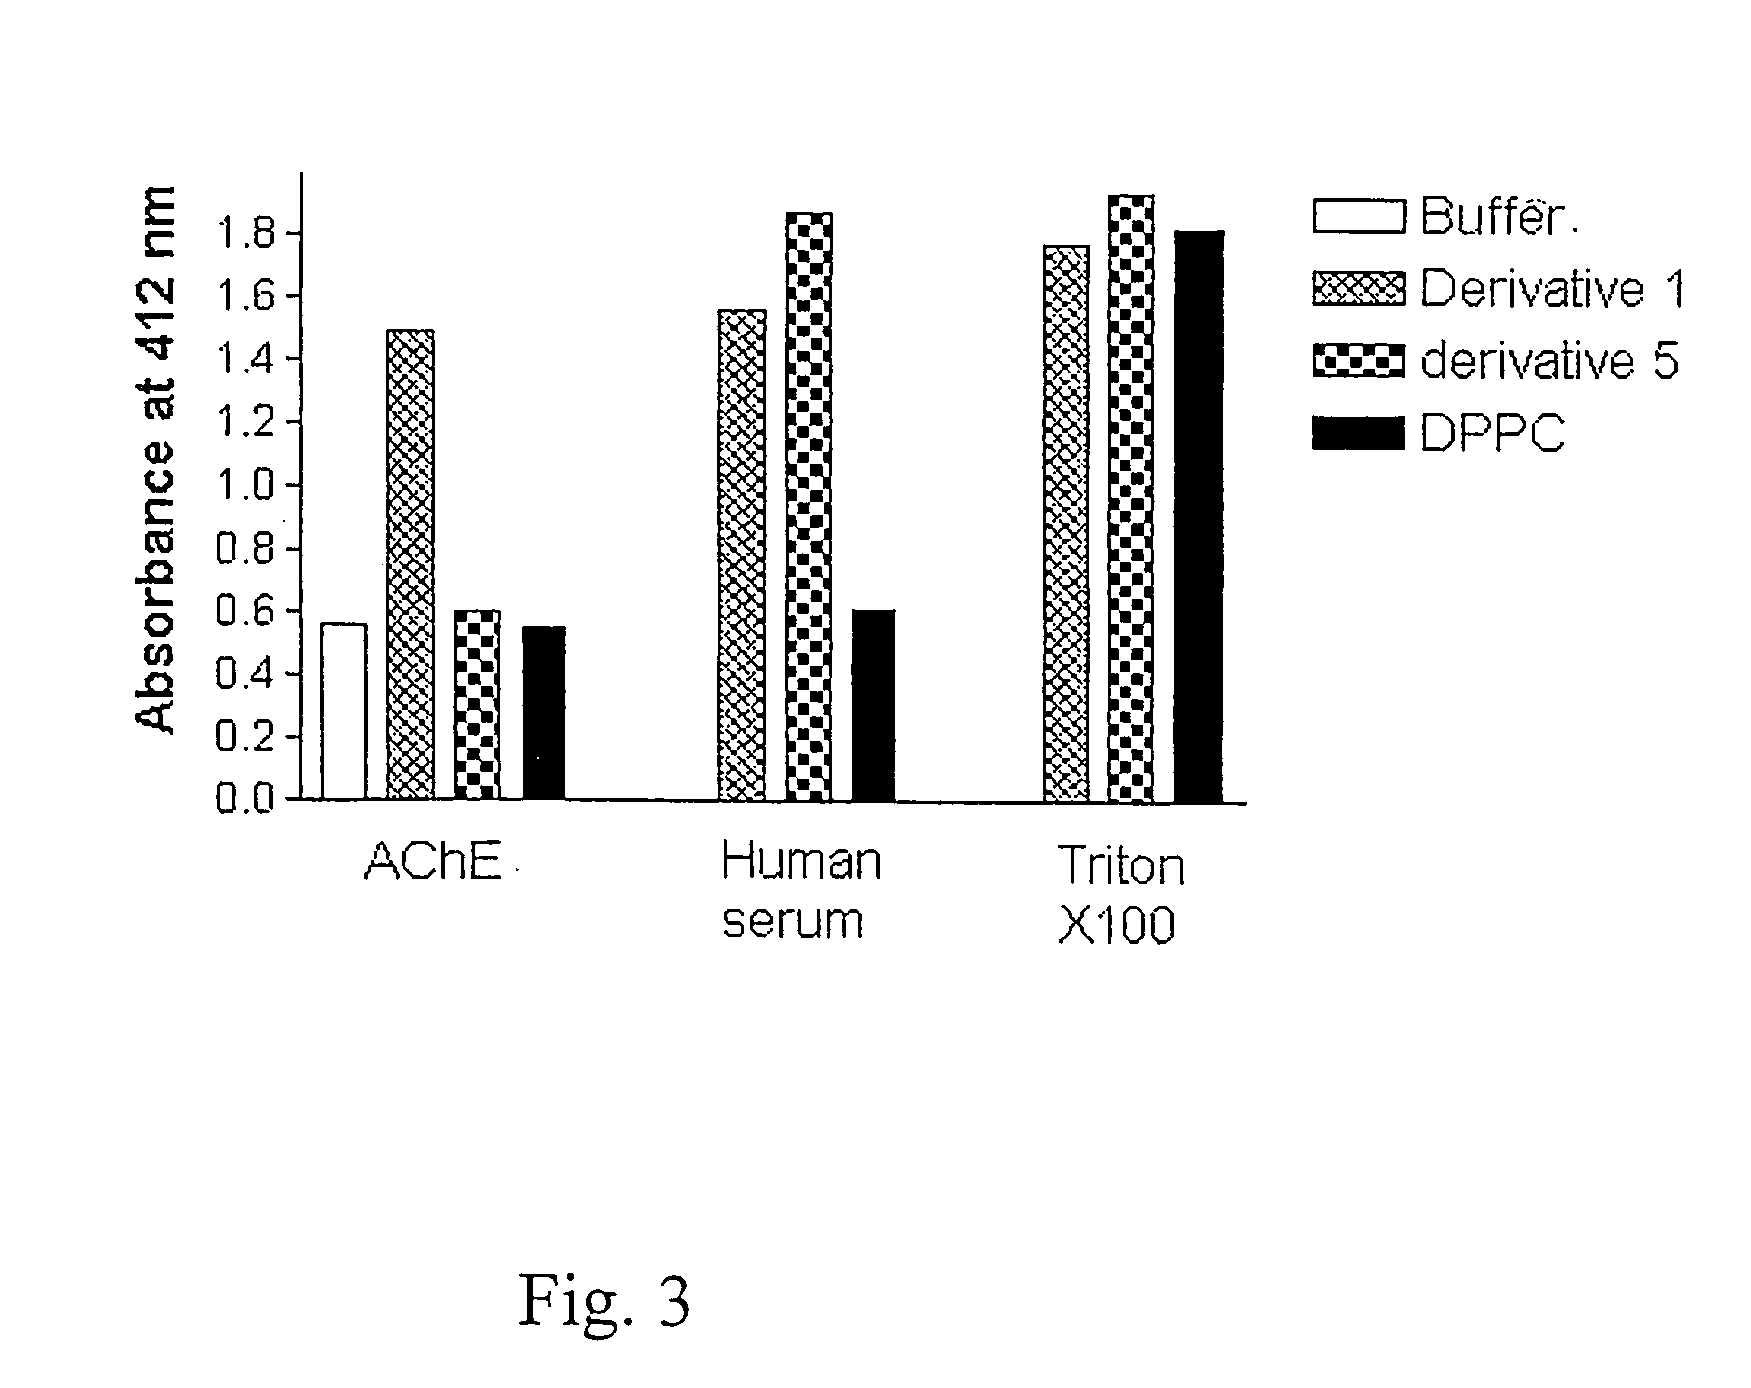 Amphiphilic compounds and vesicles liposomes for organ-specified drug targeting